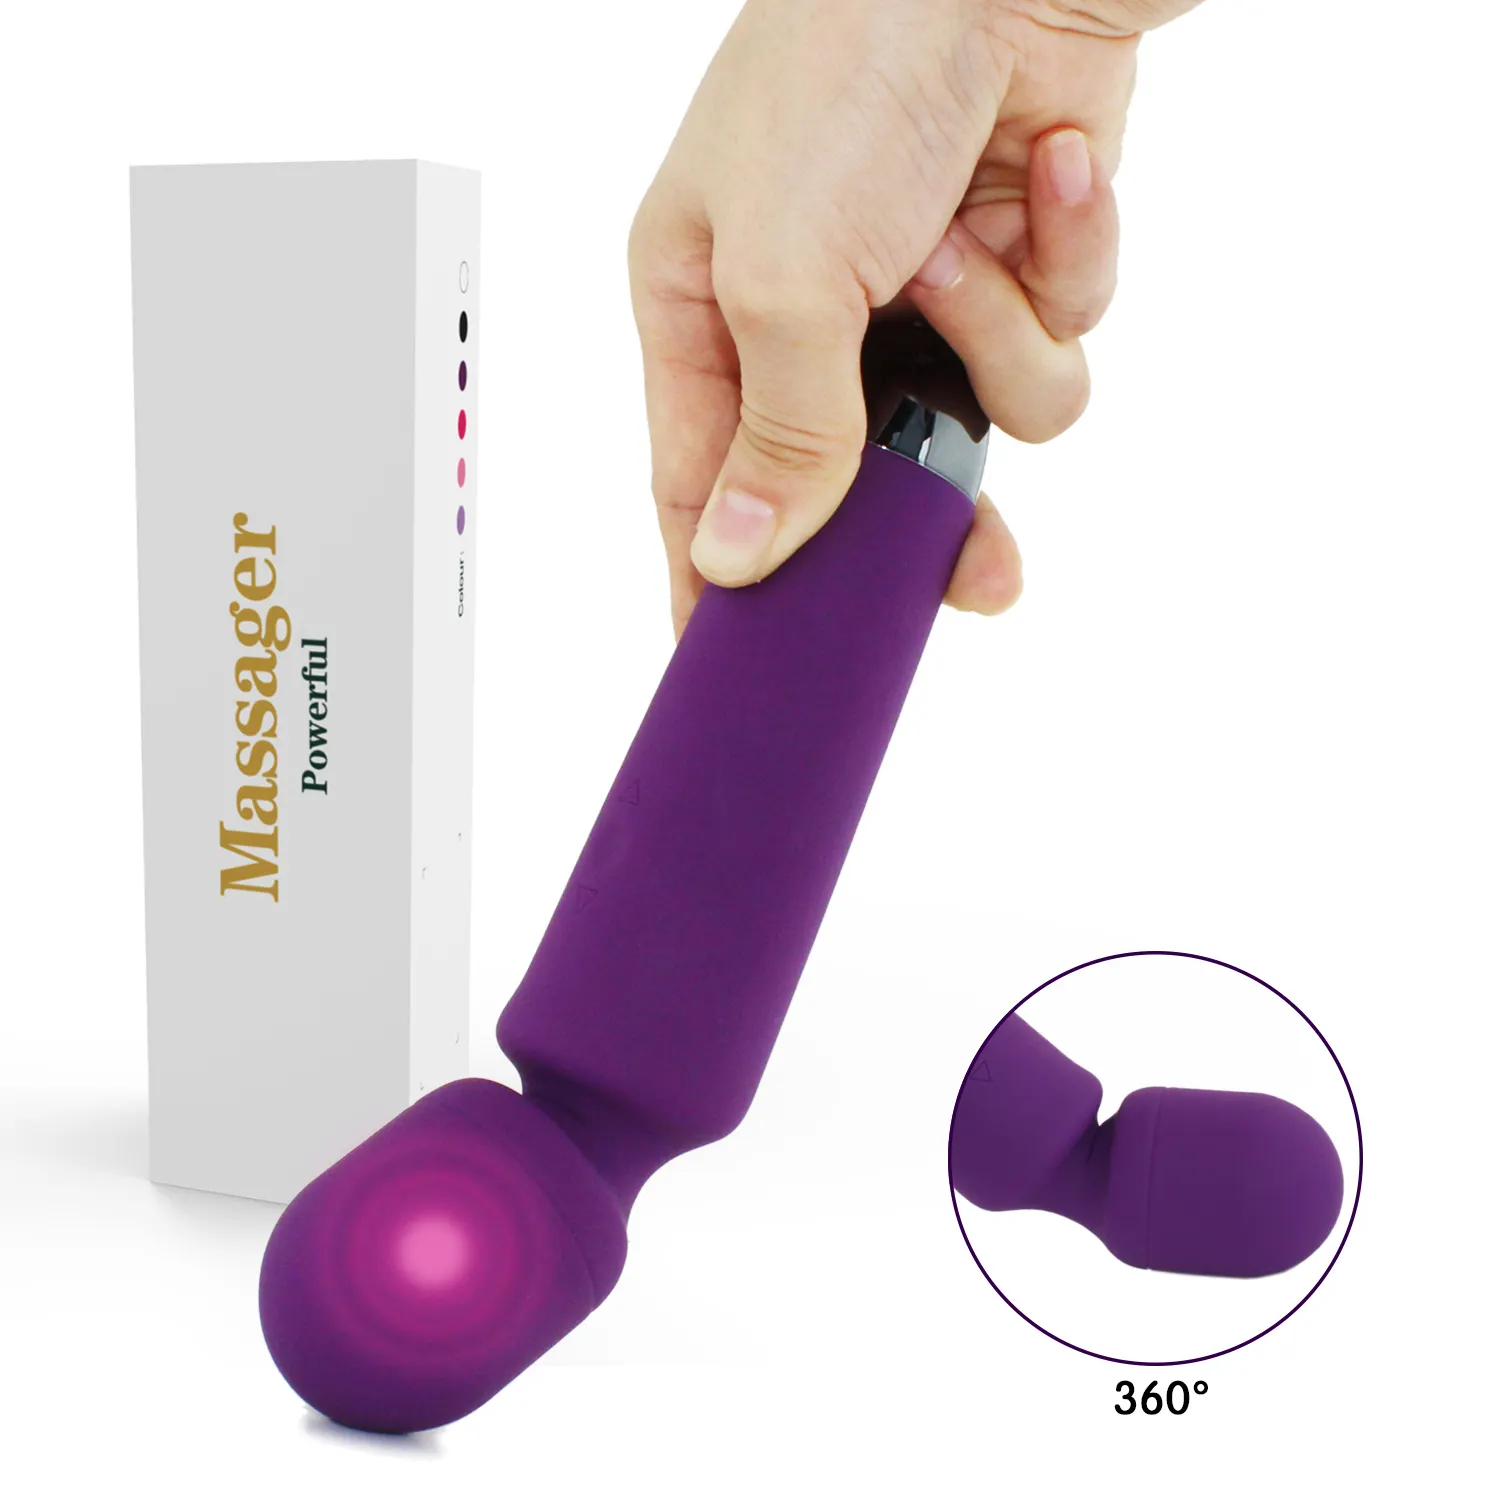 Adult Products Men Dildo Toys ABS Material Wand Massager Attachment Power Stimulate Vagina Exercise Sex Hot AV Vibrator